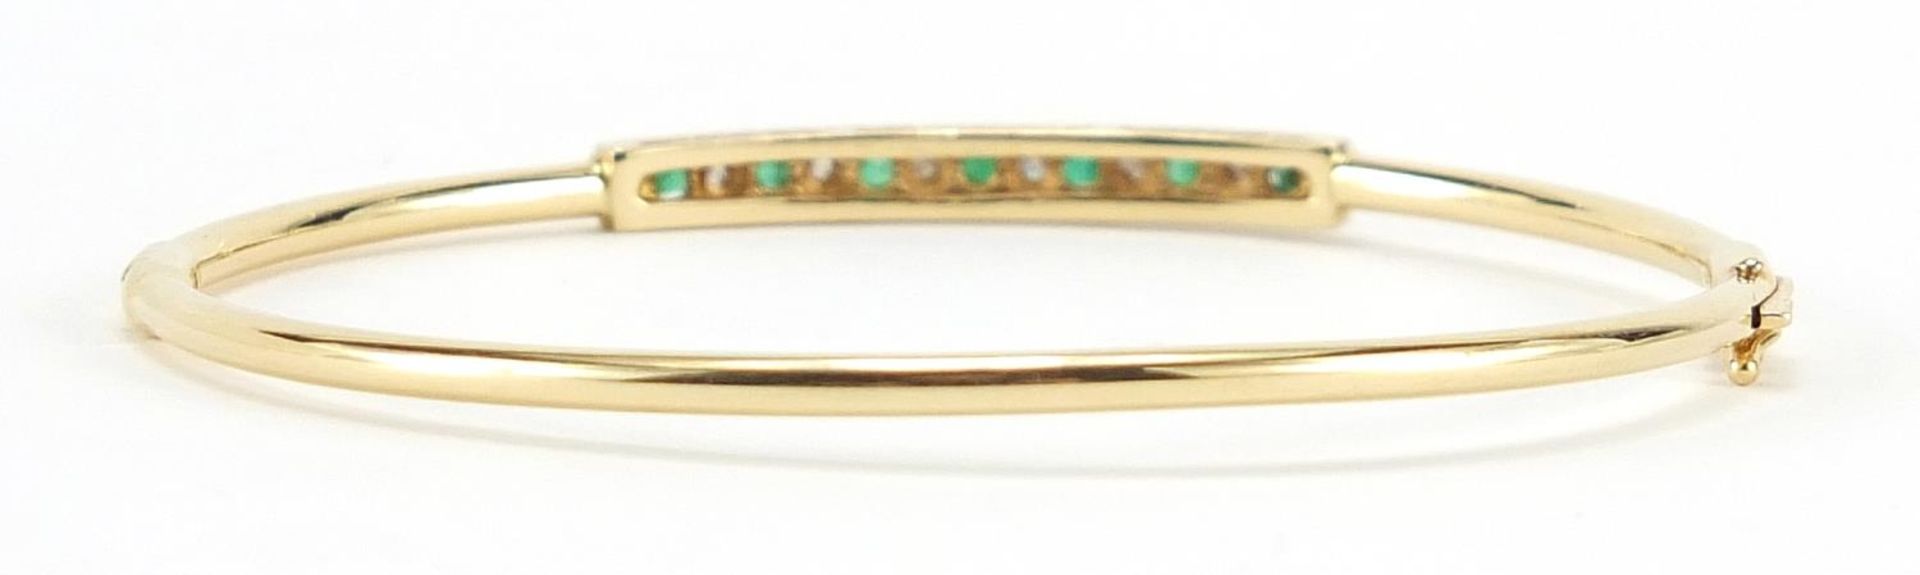 14ct gold emerald and diamond bangle, 6.3cm in diameter, 5.5g - Image 2 of 3